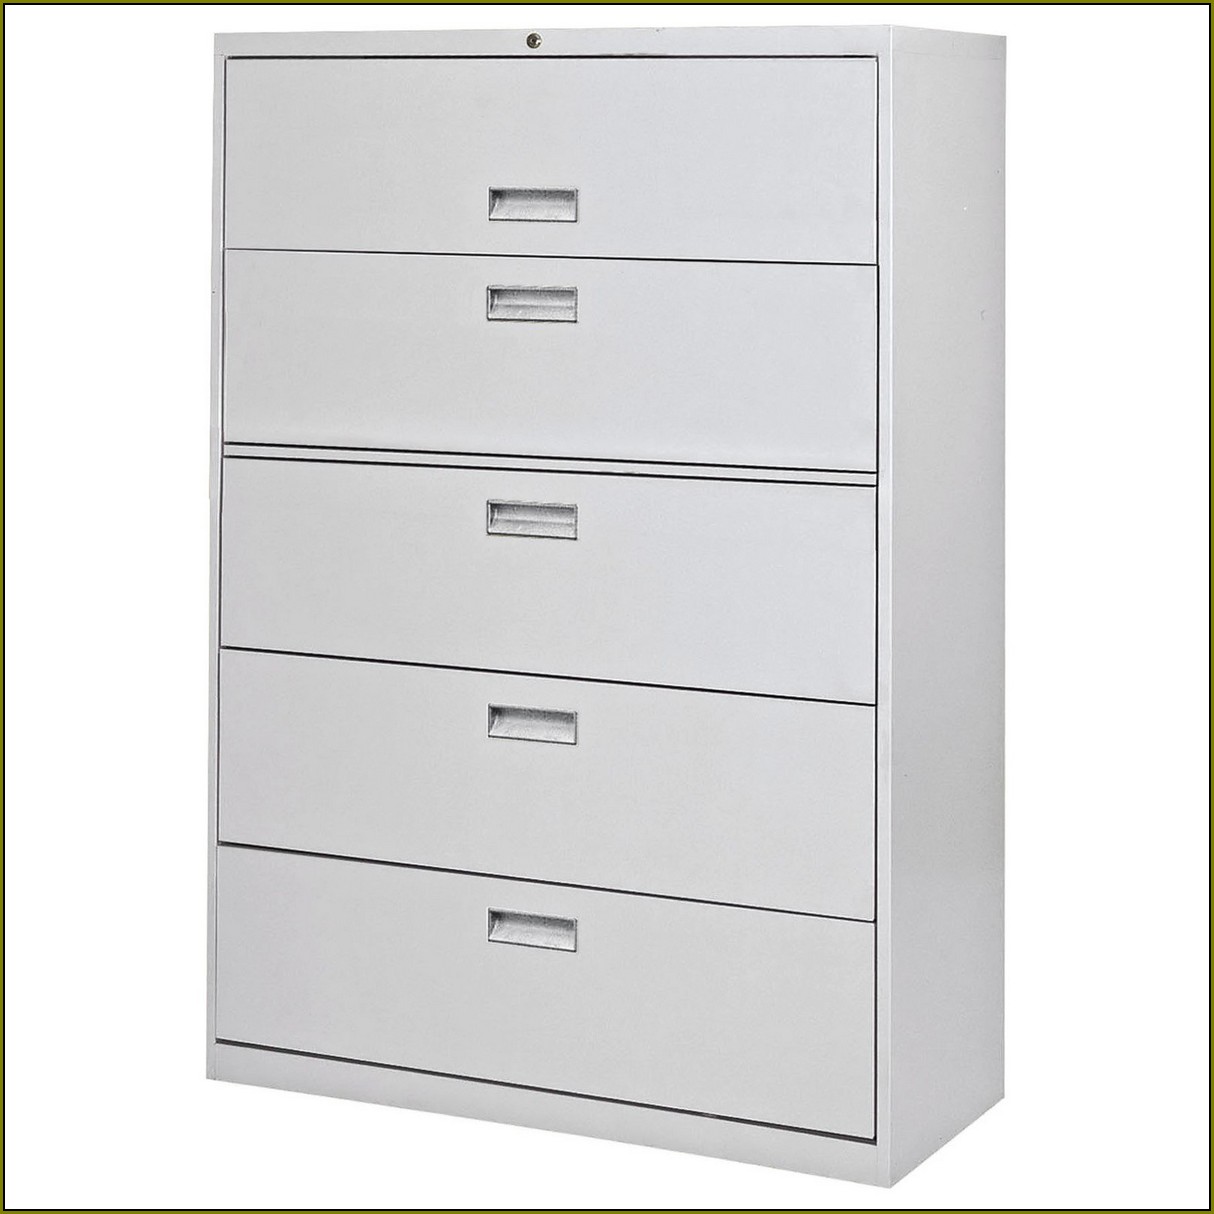 5 Drawer Lateral File Cabinet Weight